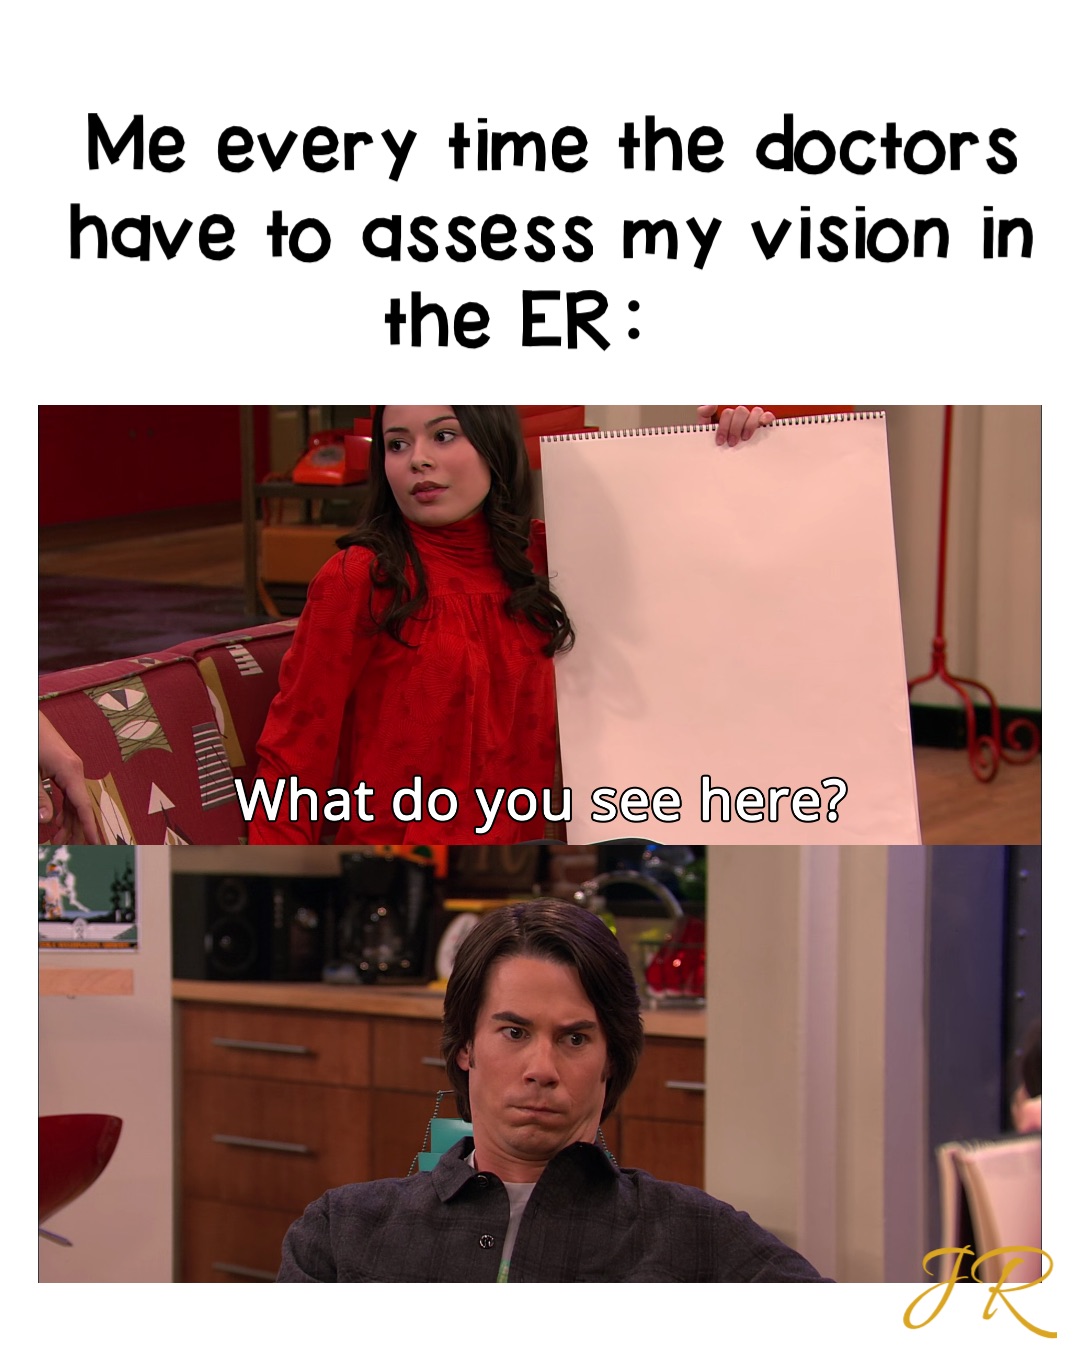 Me every time the doctors have to assess my vision in the ER：